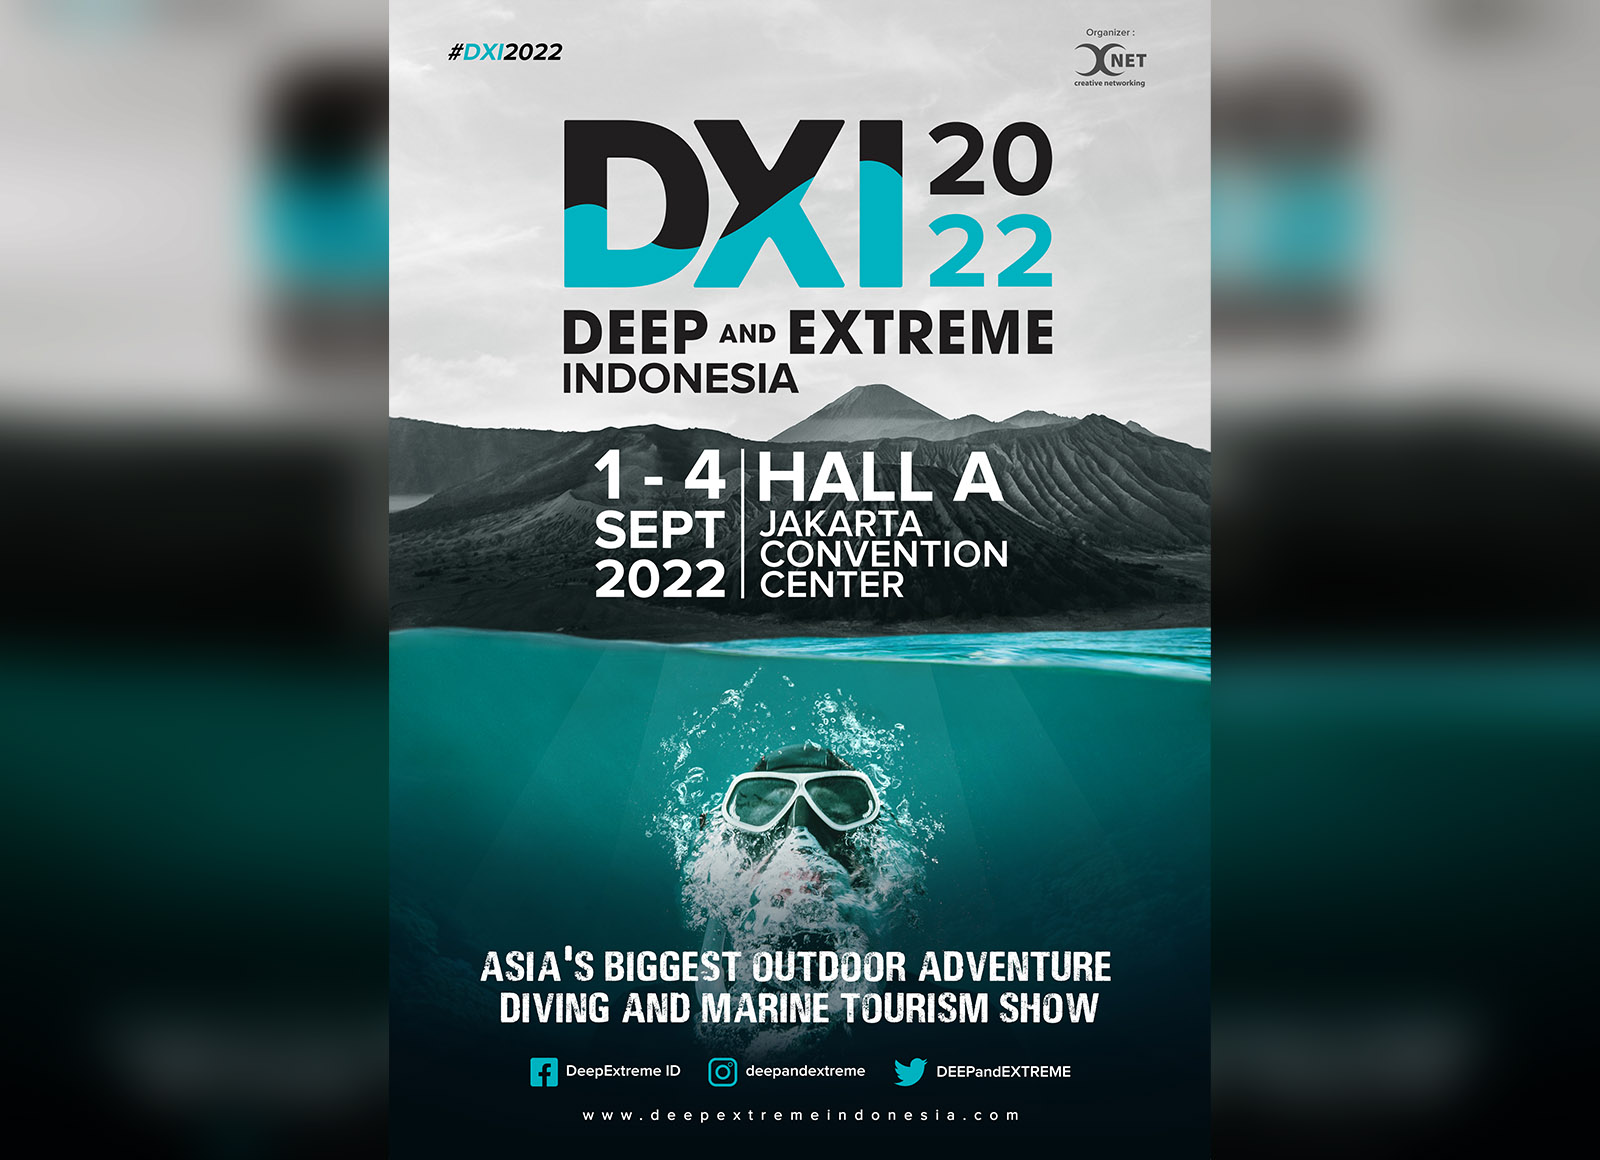 DXI 2022 Asia Biggest Outdoor Adventure, Diving and Marine Tourism Show